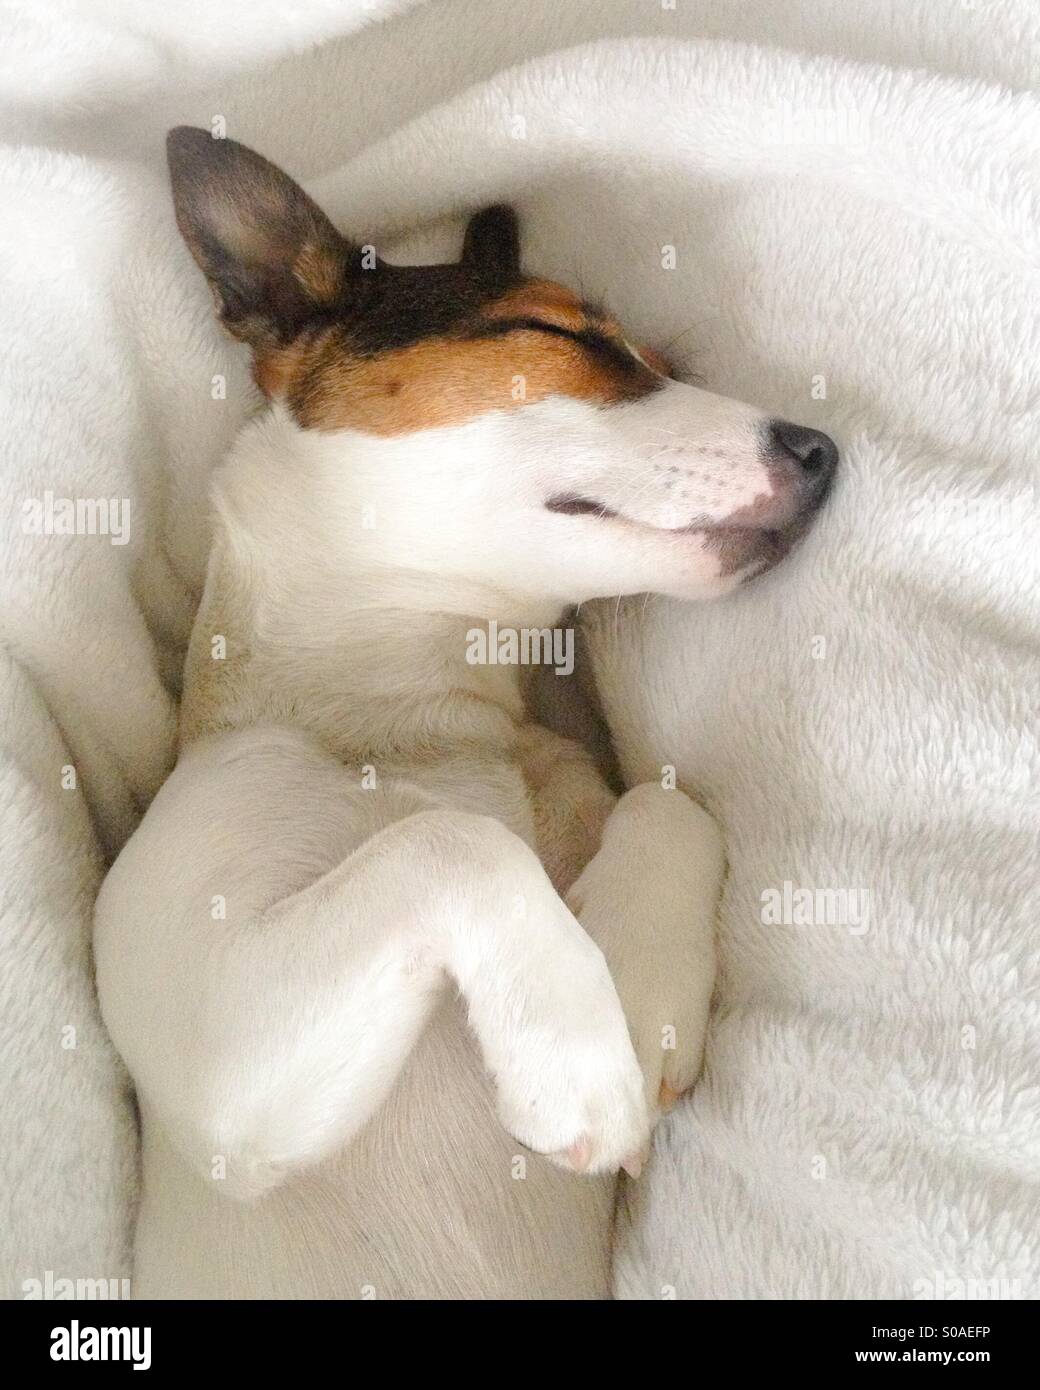 Jack Russell Terrier puppy dog sleeping soundly on her back. Stock Photo